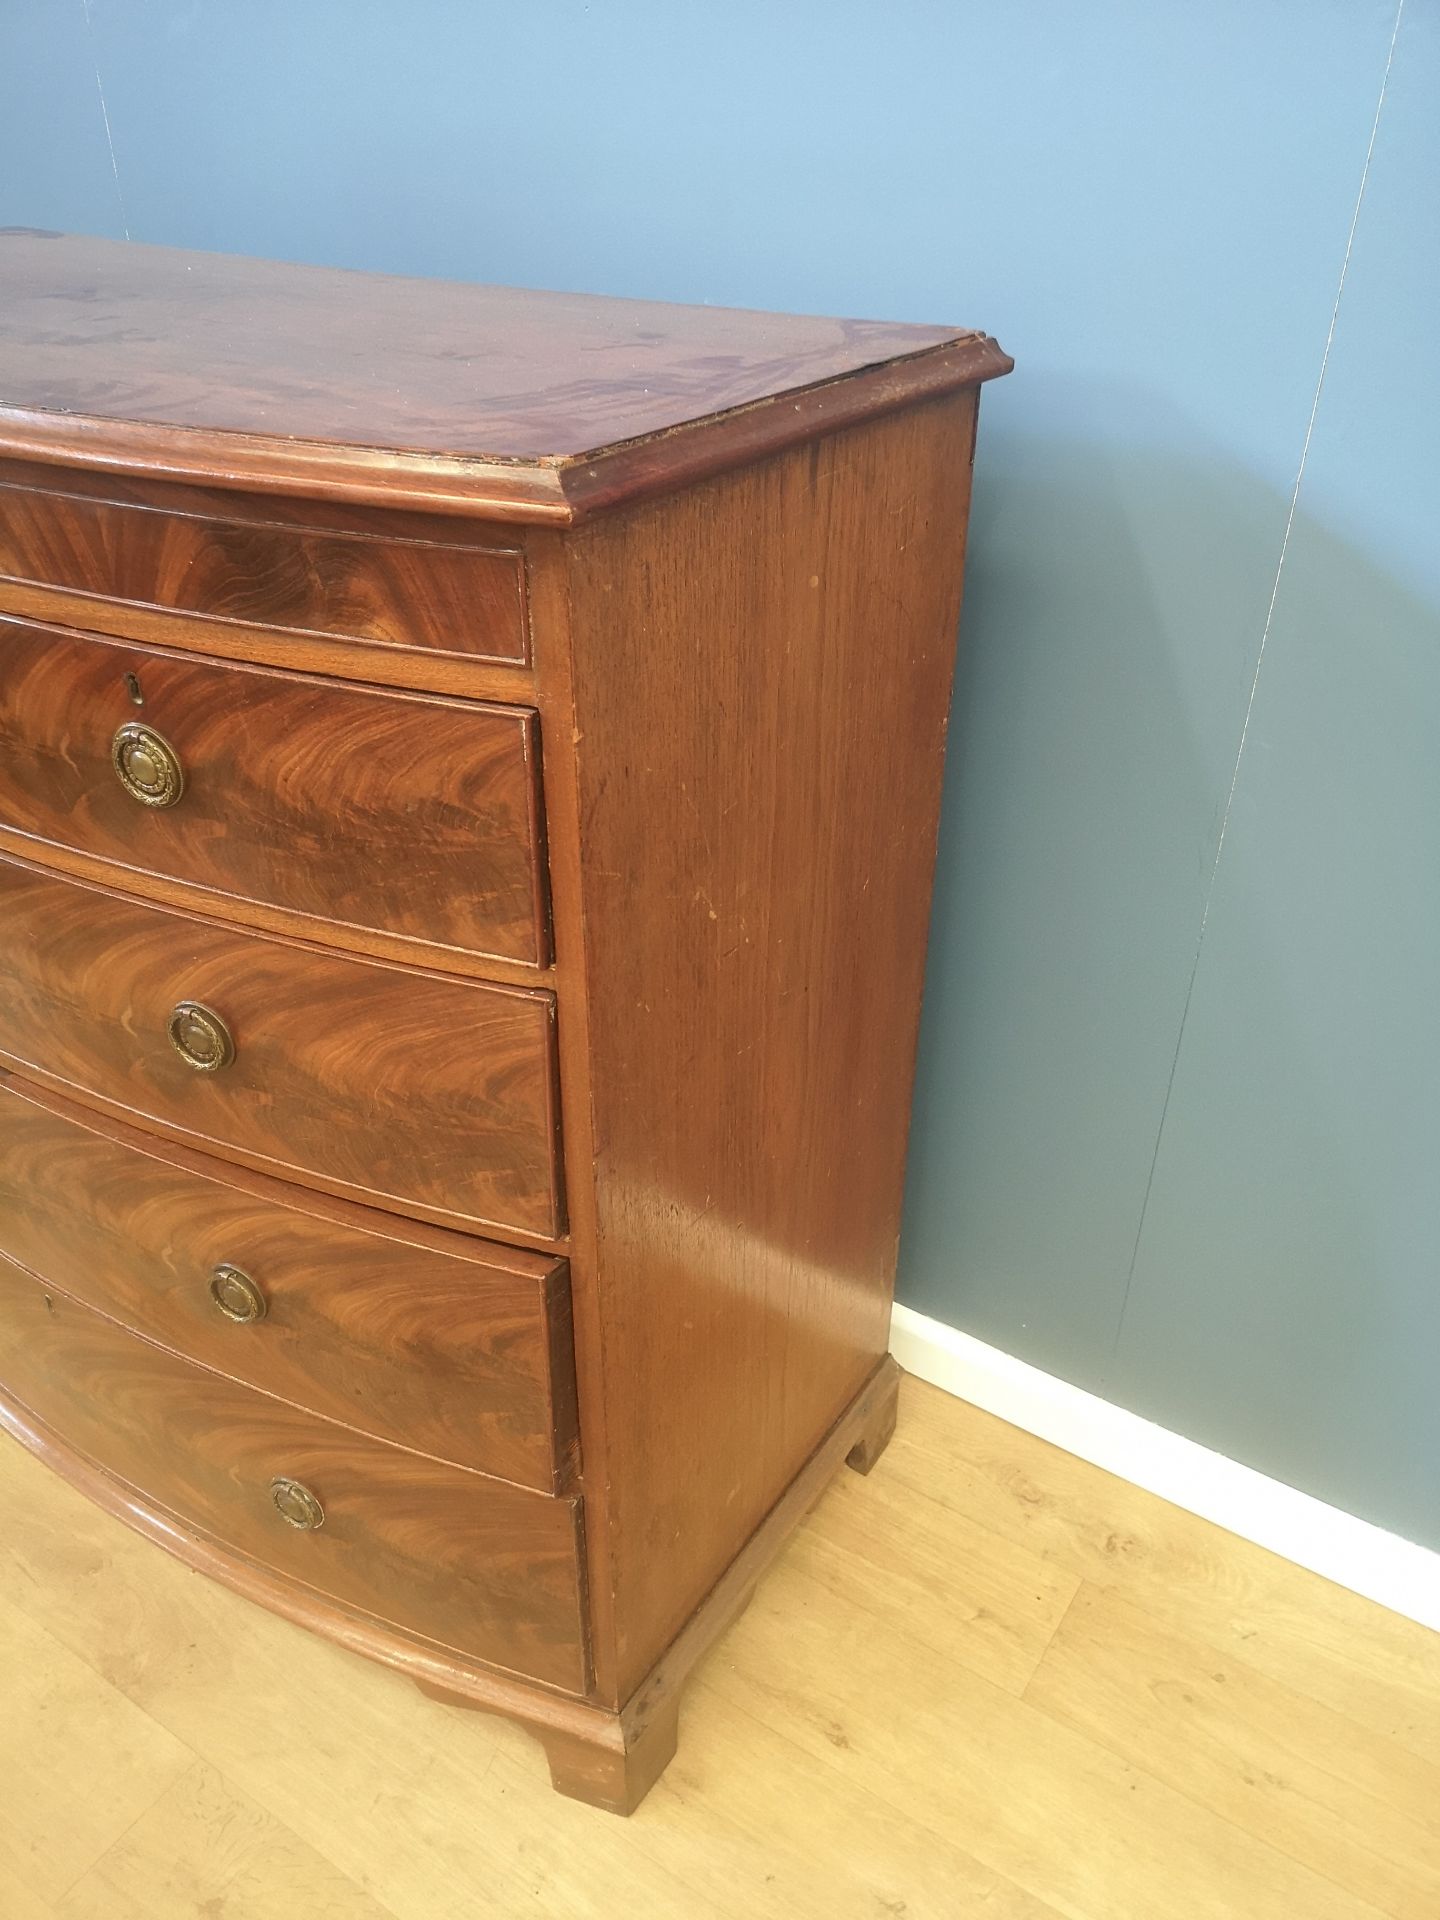 Mahogany bow fronted chest of drawers - Image 6 of 6